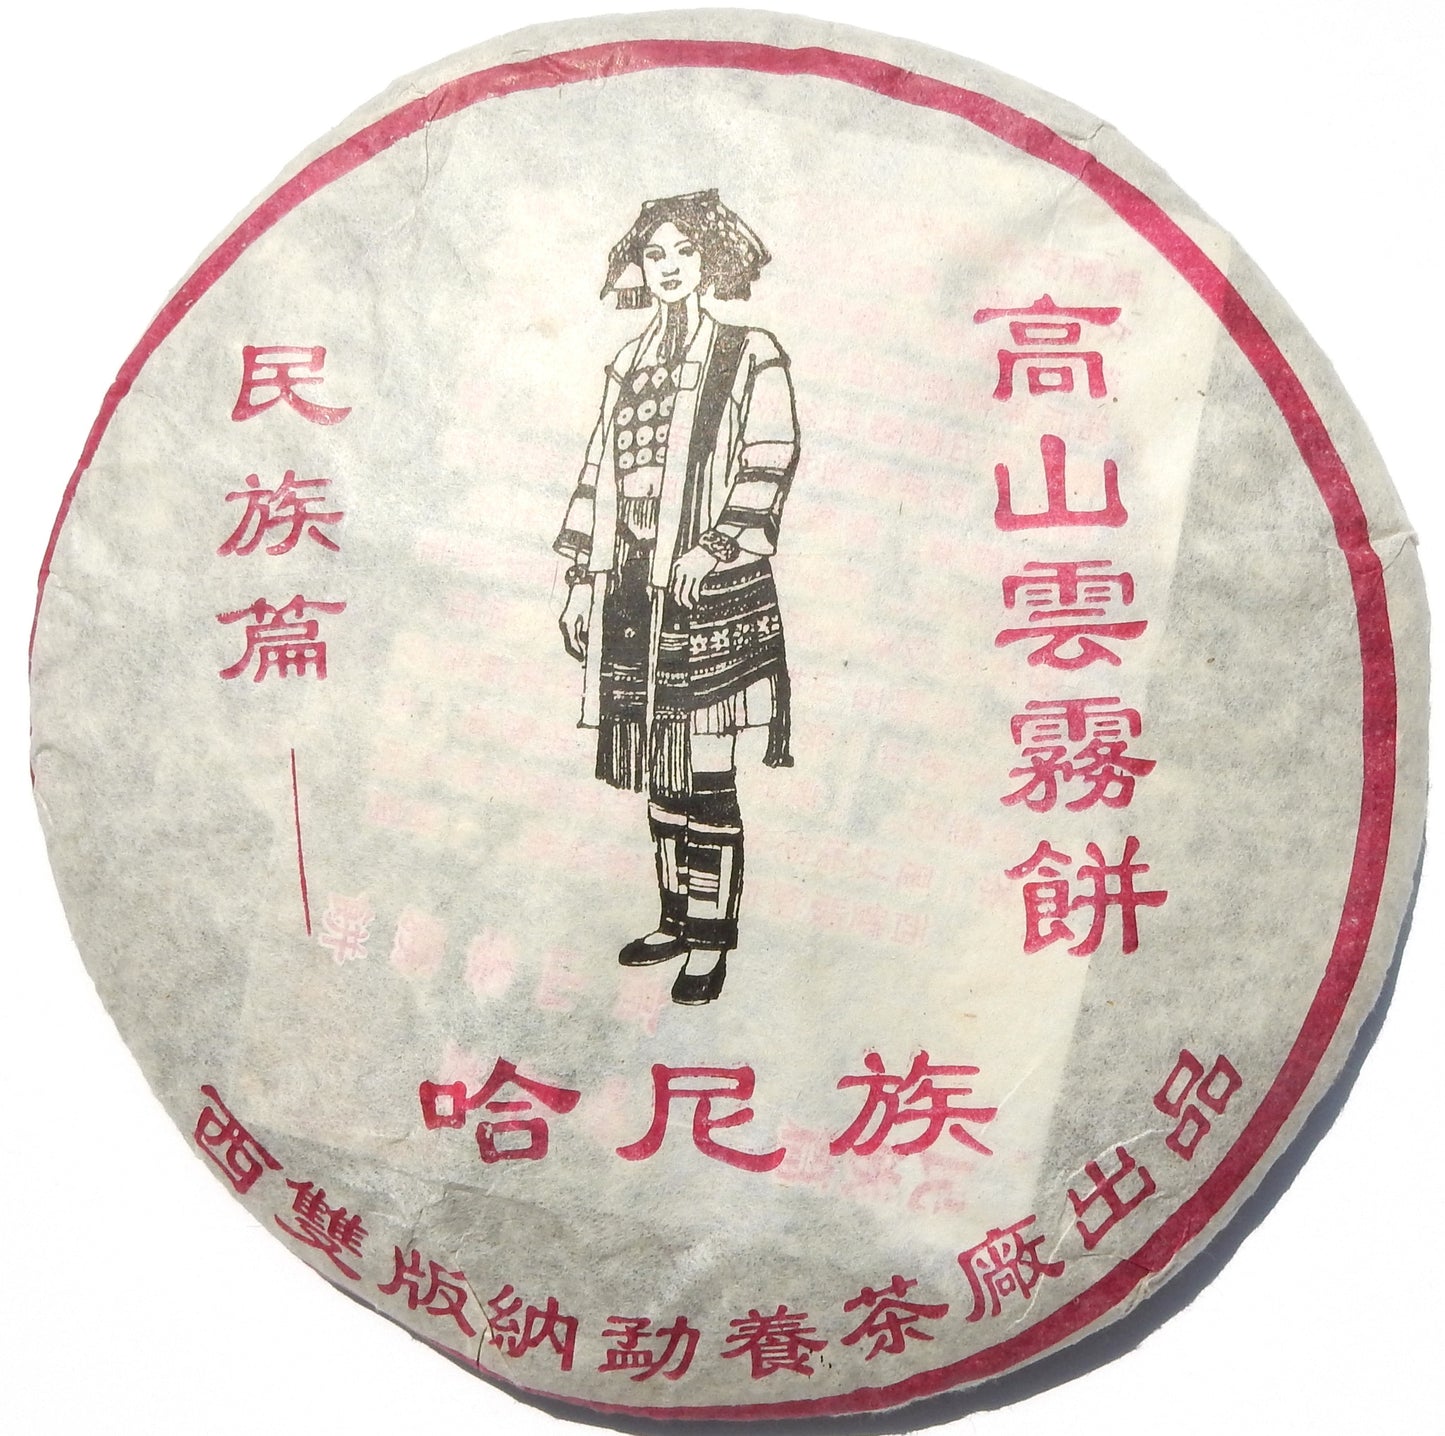 Mountain Mist Chinese Sheng Pu-ehr tea cake in white packaging with red lettering and the image of a woman